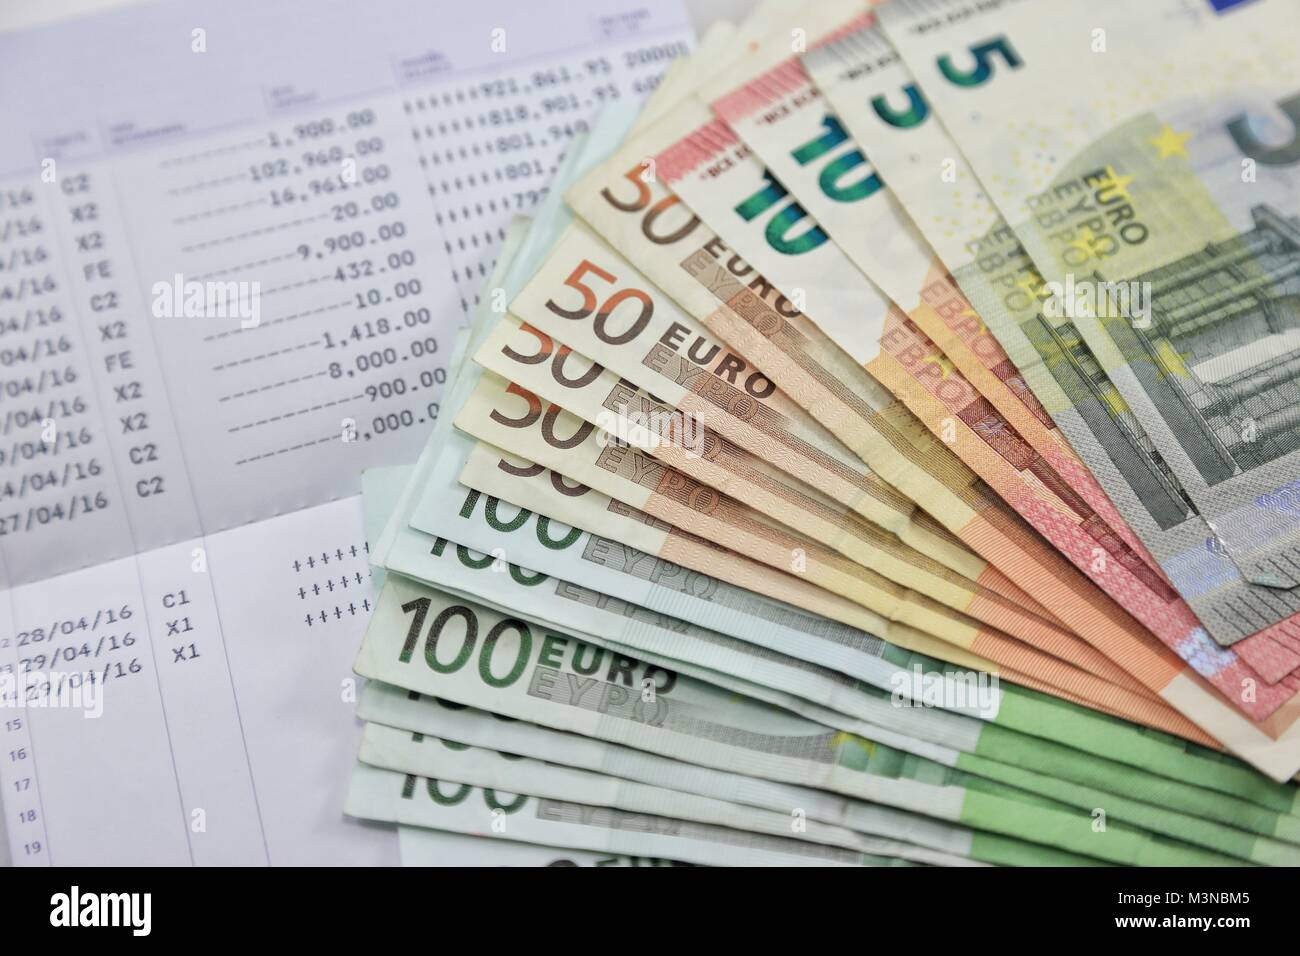 Many euro banknotes and bank account passbook show a lot of transactions. concept and idea of saving money, investment, interest, bank loan, inflation Stock Photo